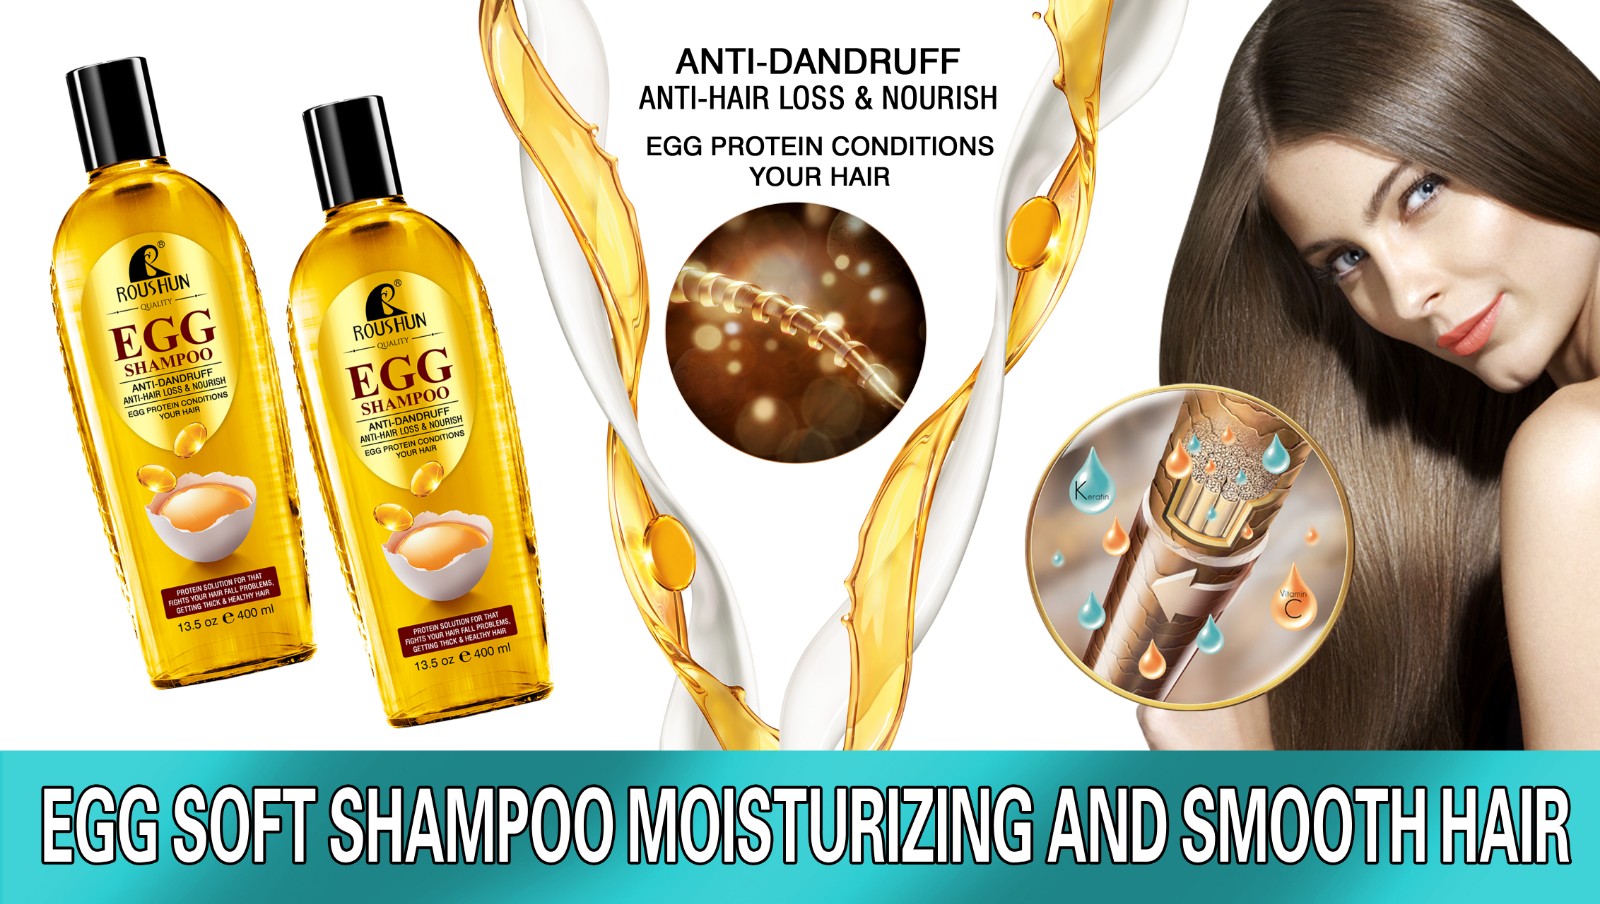 Egg Shampoo and Hair conditioner